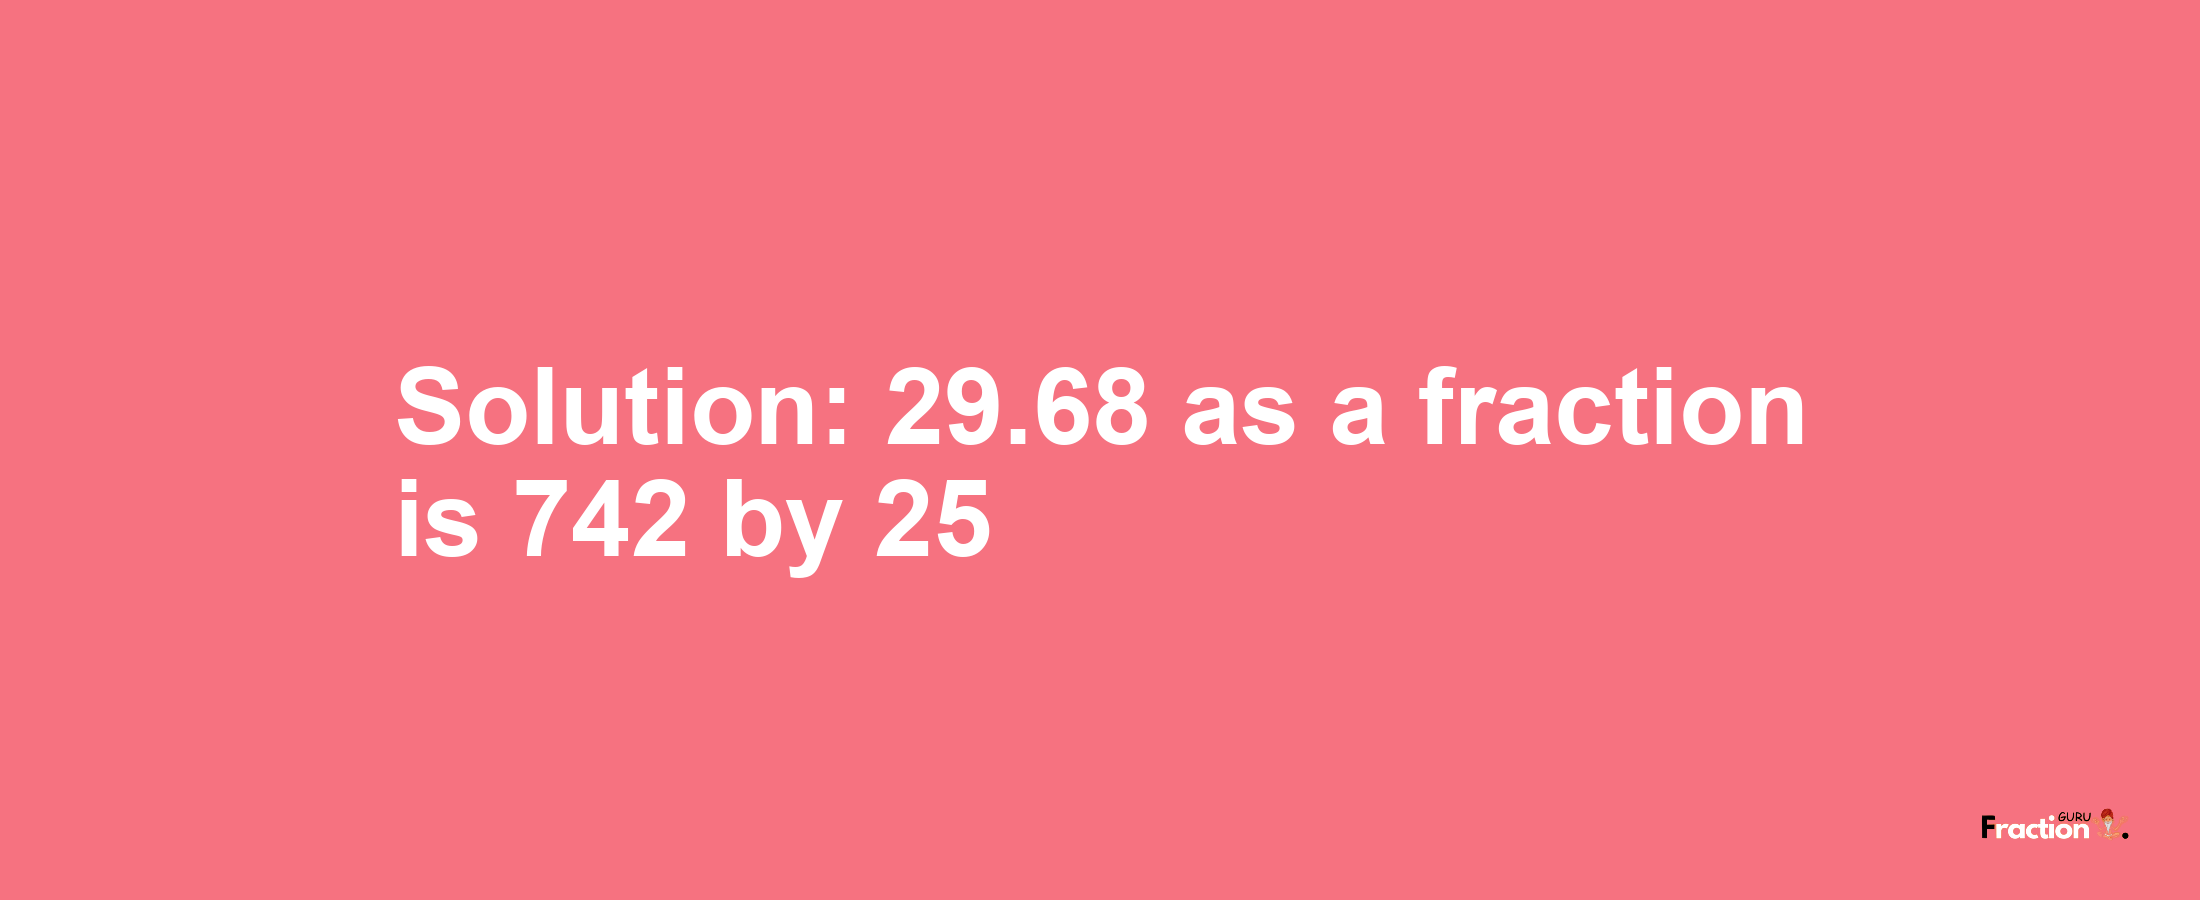 Solution:29.68 as a fraction is 742/25